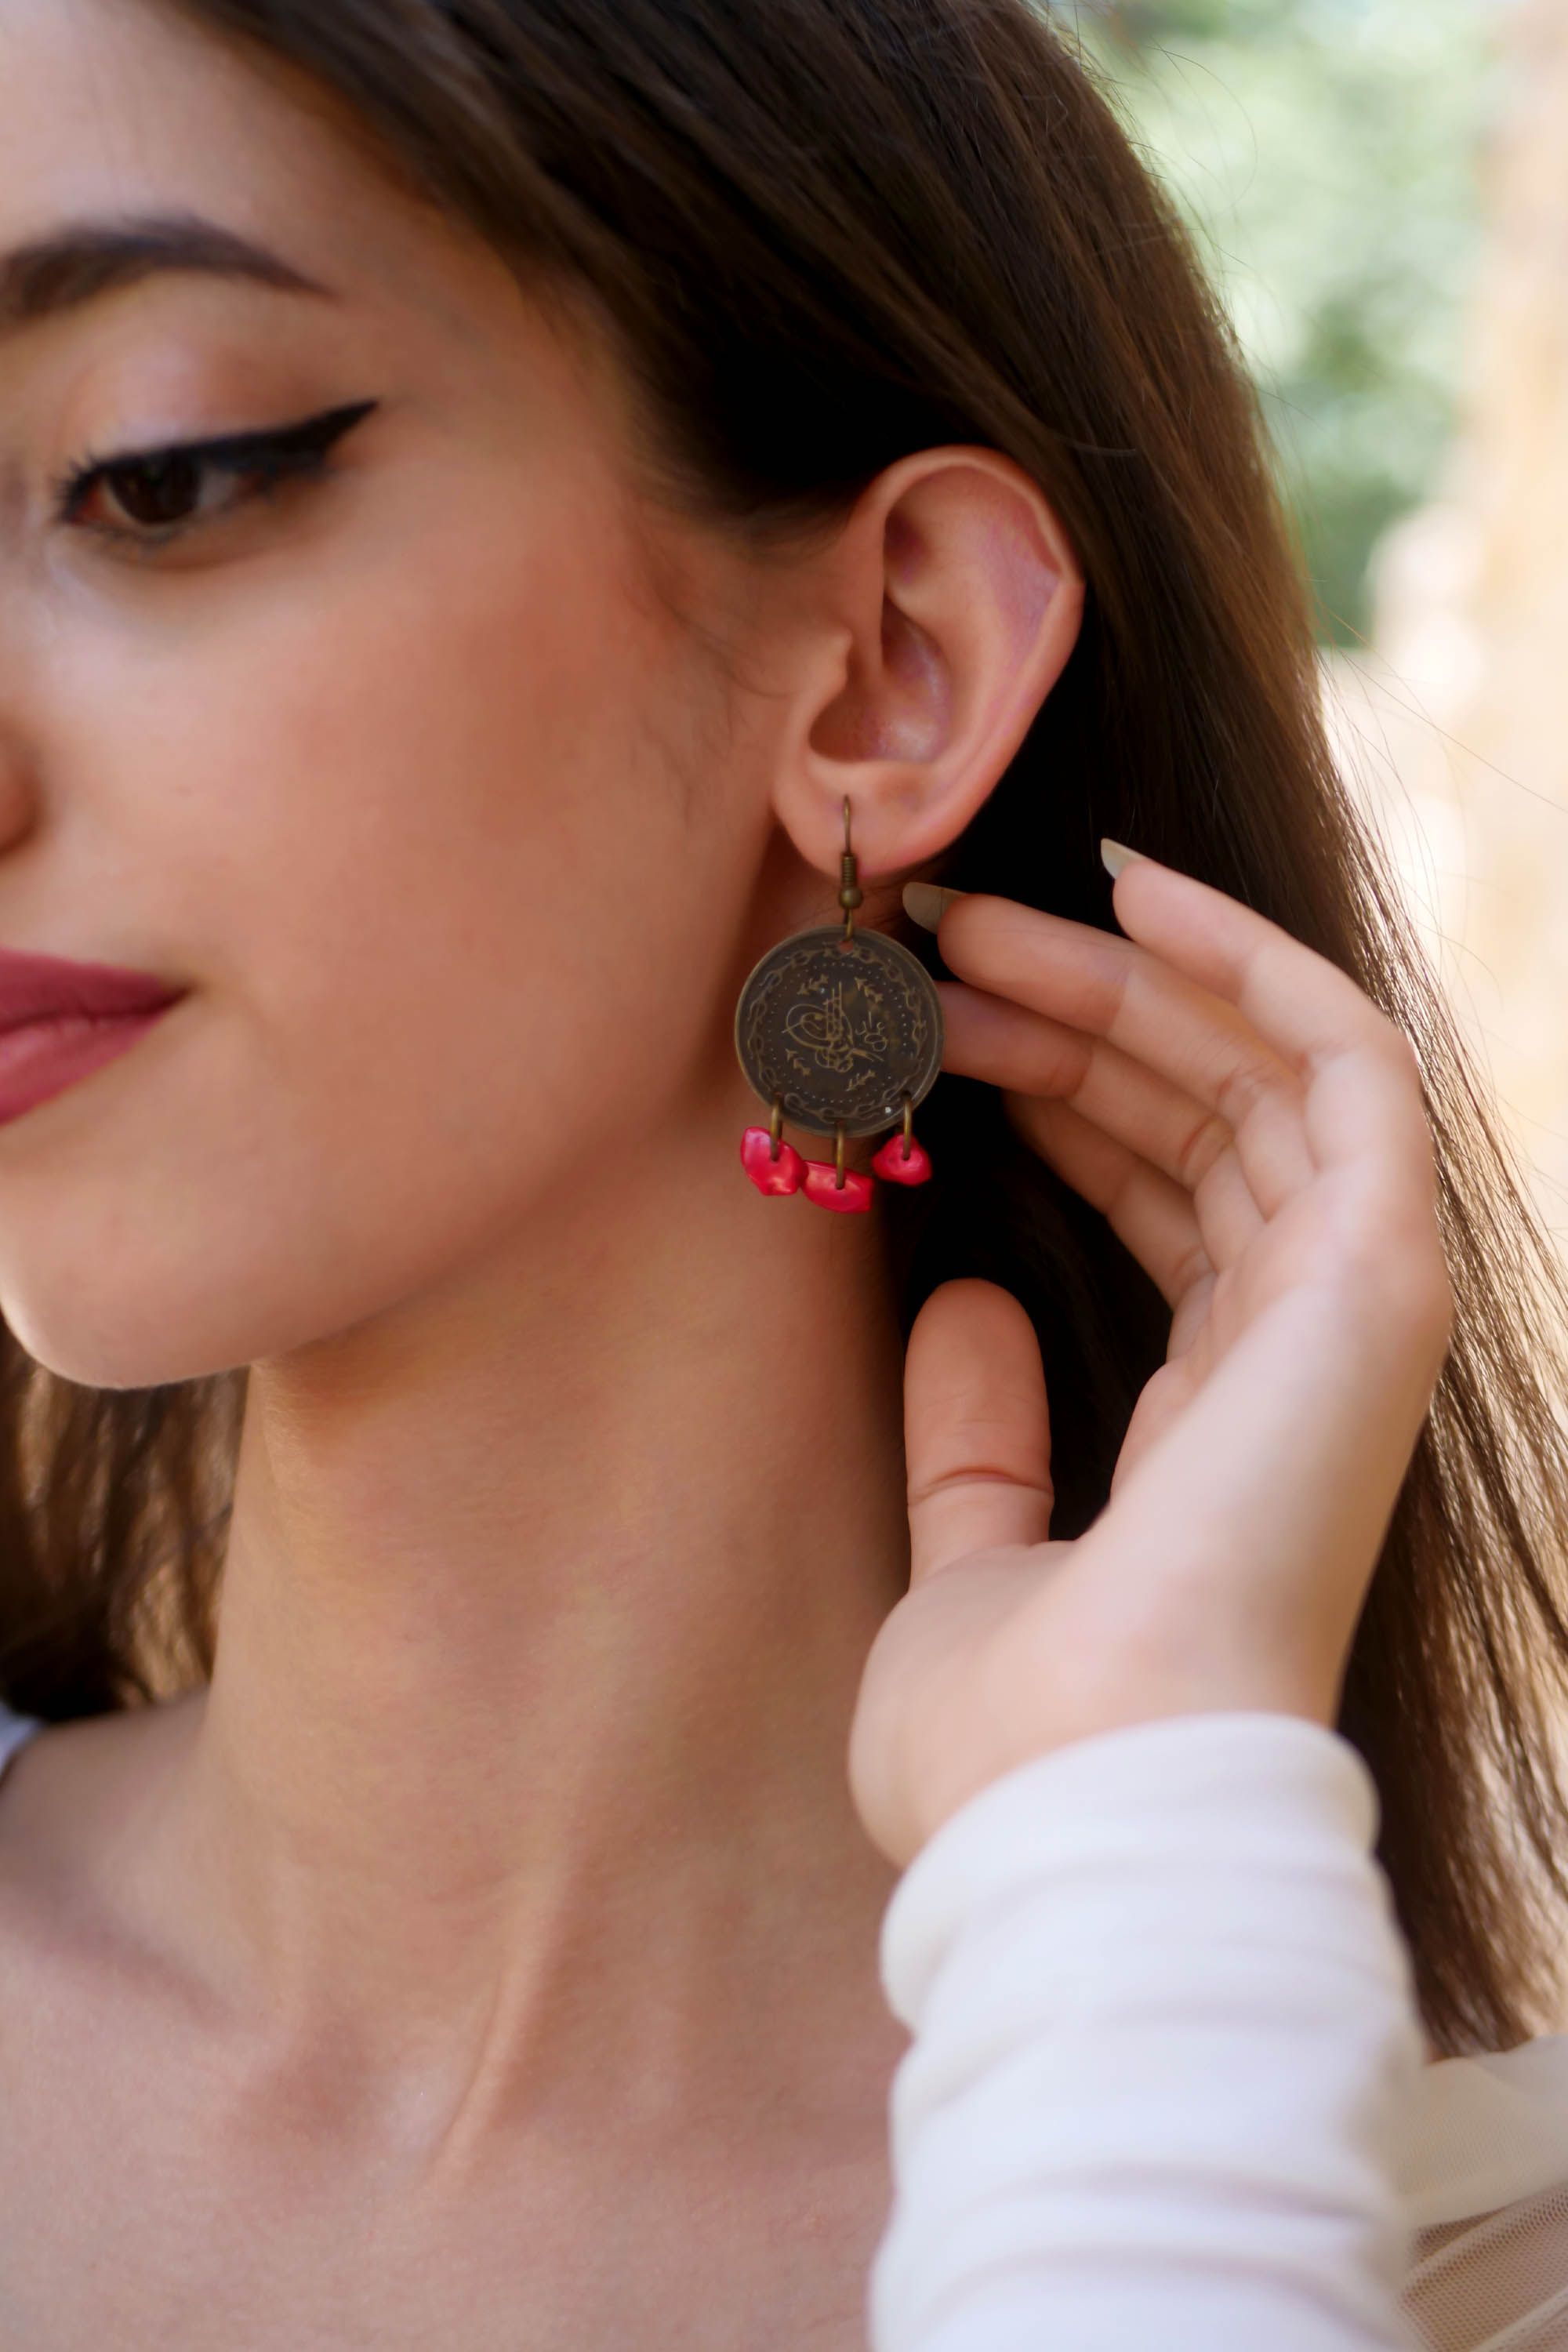 As old As Time Handmade Coin Earrings